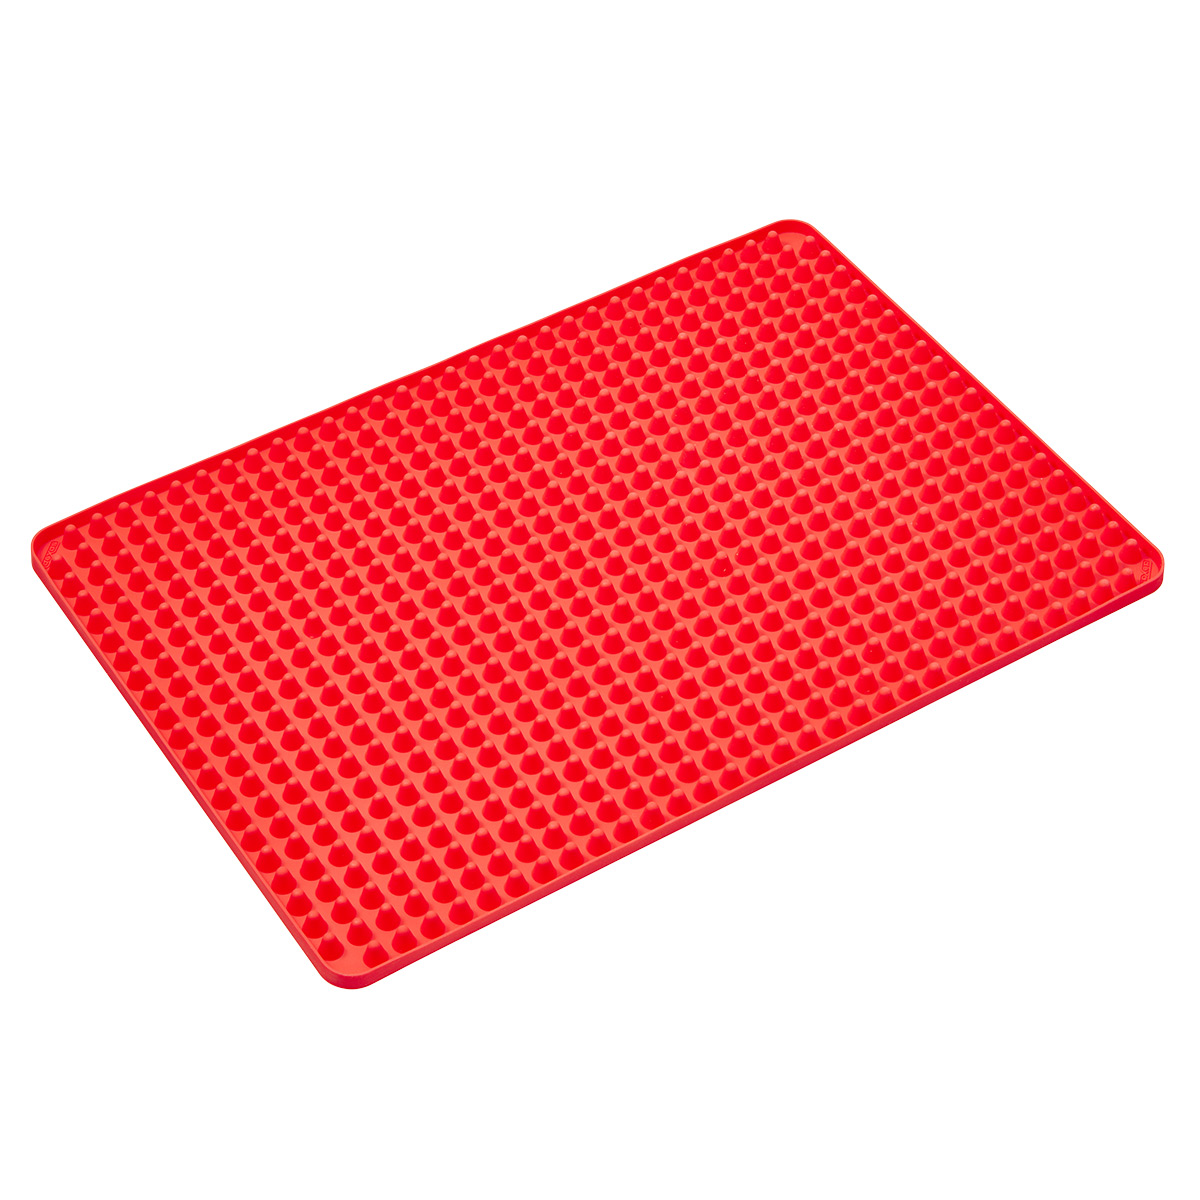 Dexas Elevated Silicone Cooking Mat